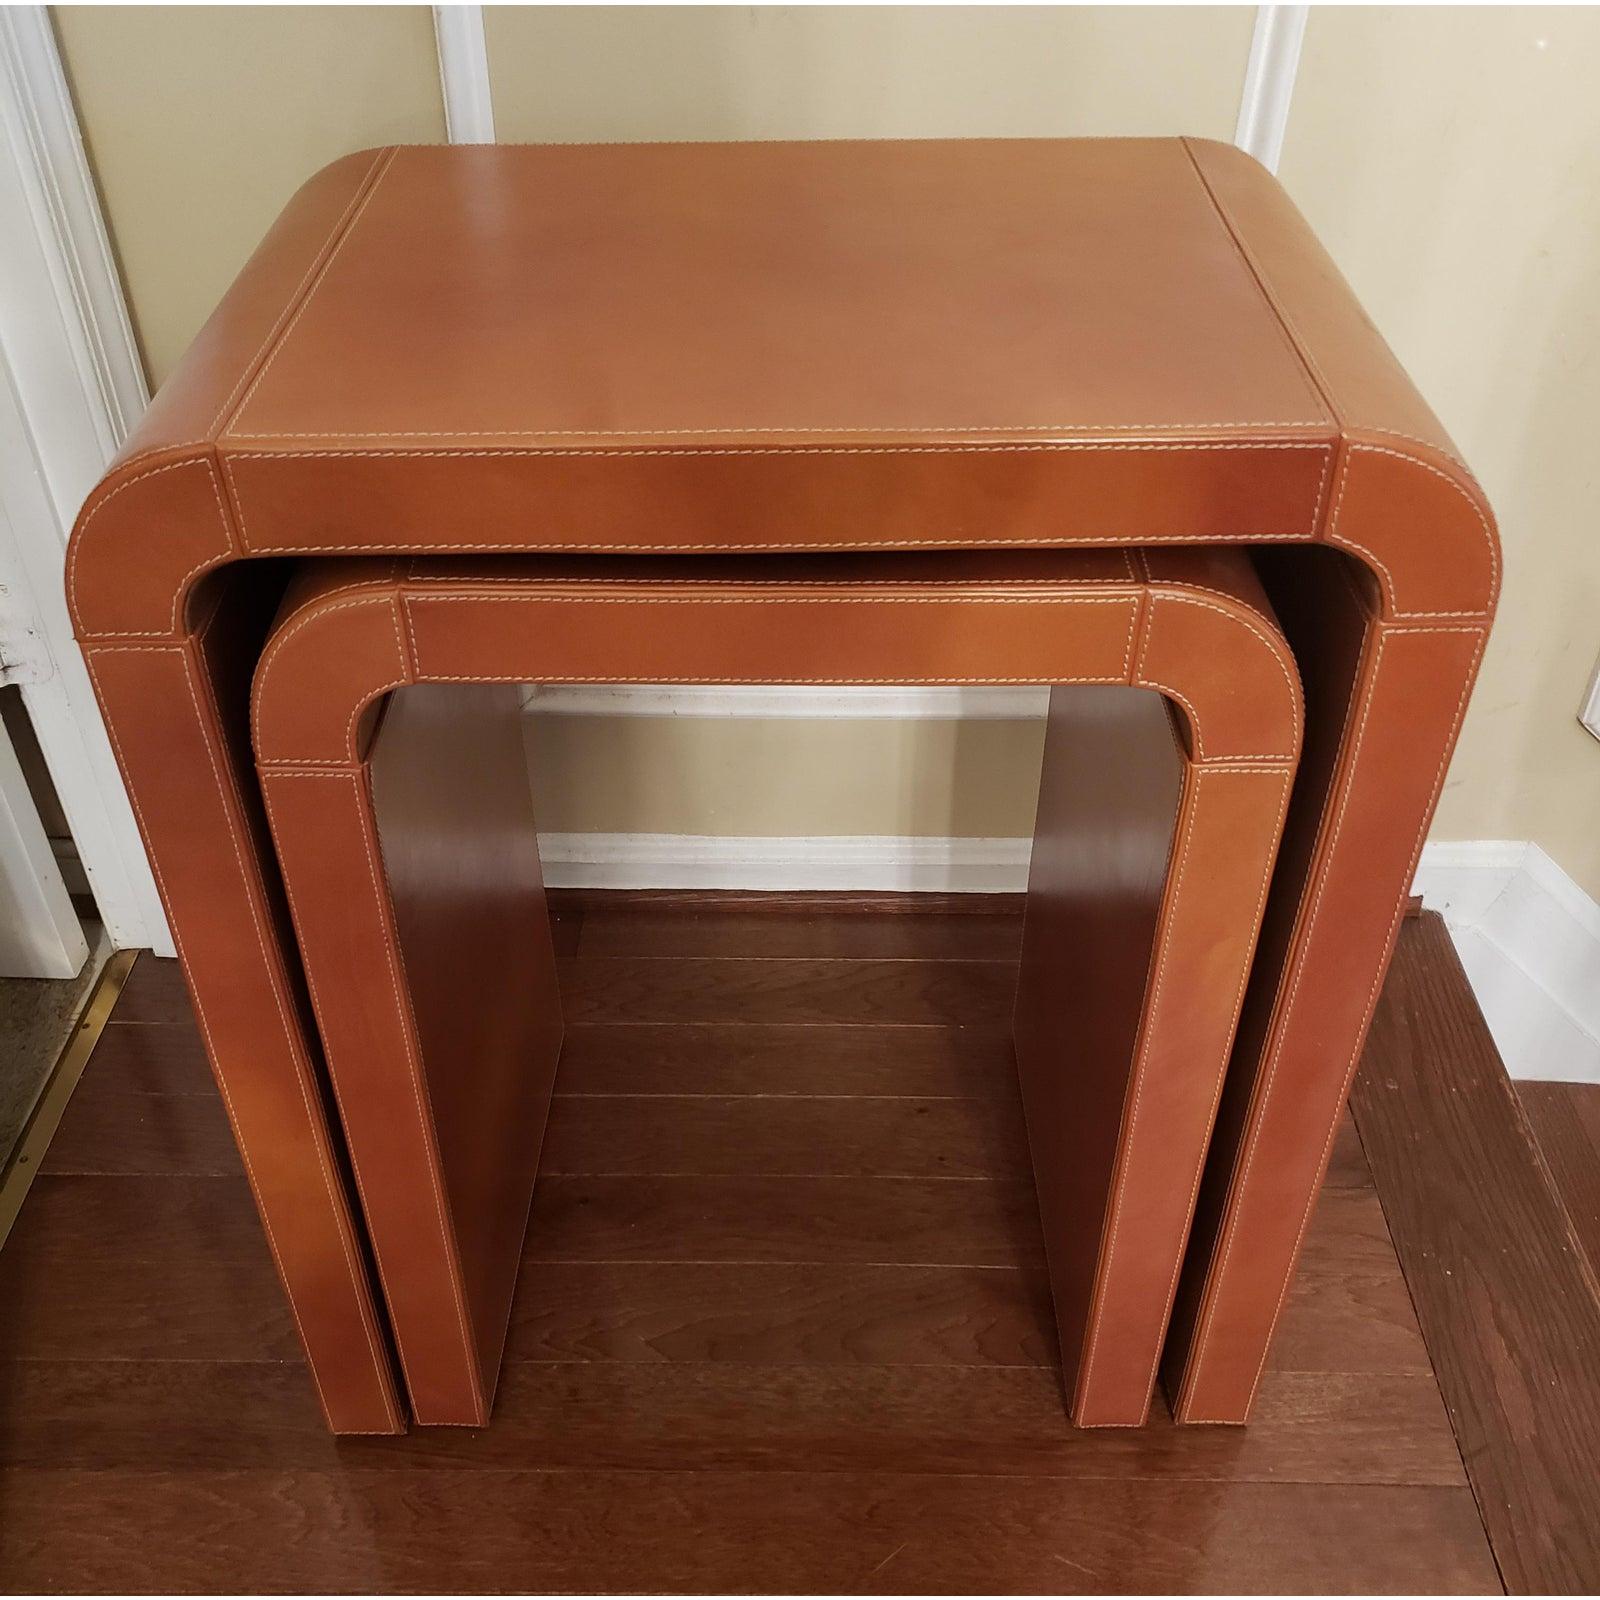 Nesting of waterfall tables in full grain leather. Tan in color. Larger table measures 24WX15DX24H and the smaller table 20W X15XD 24H
Very good condition with some signs of use.
 